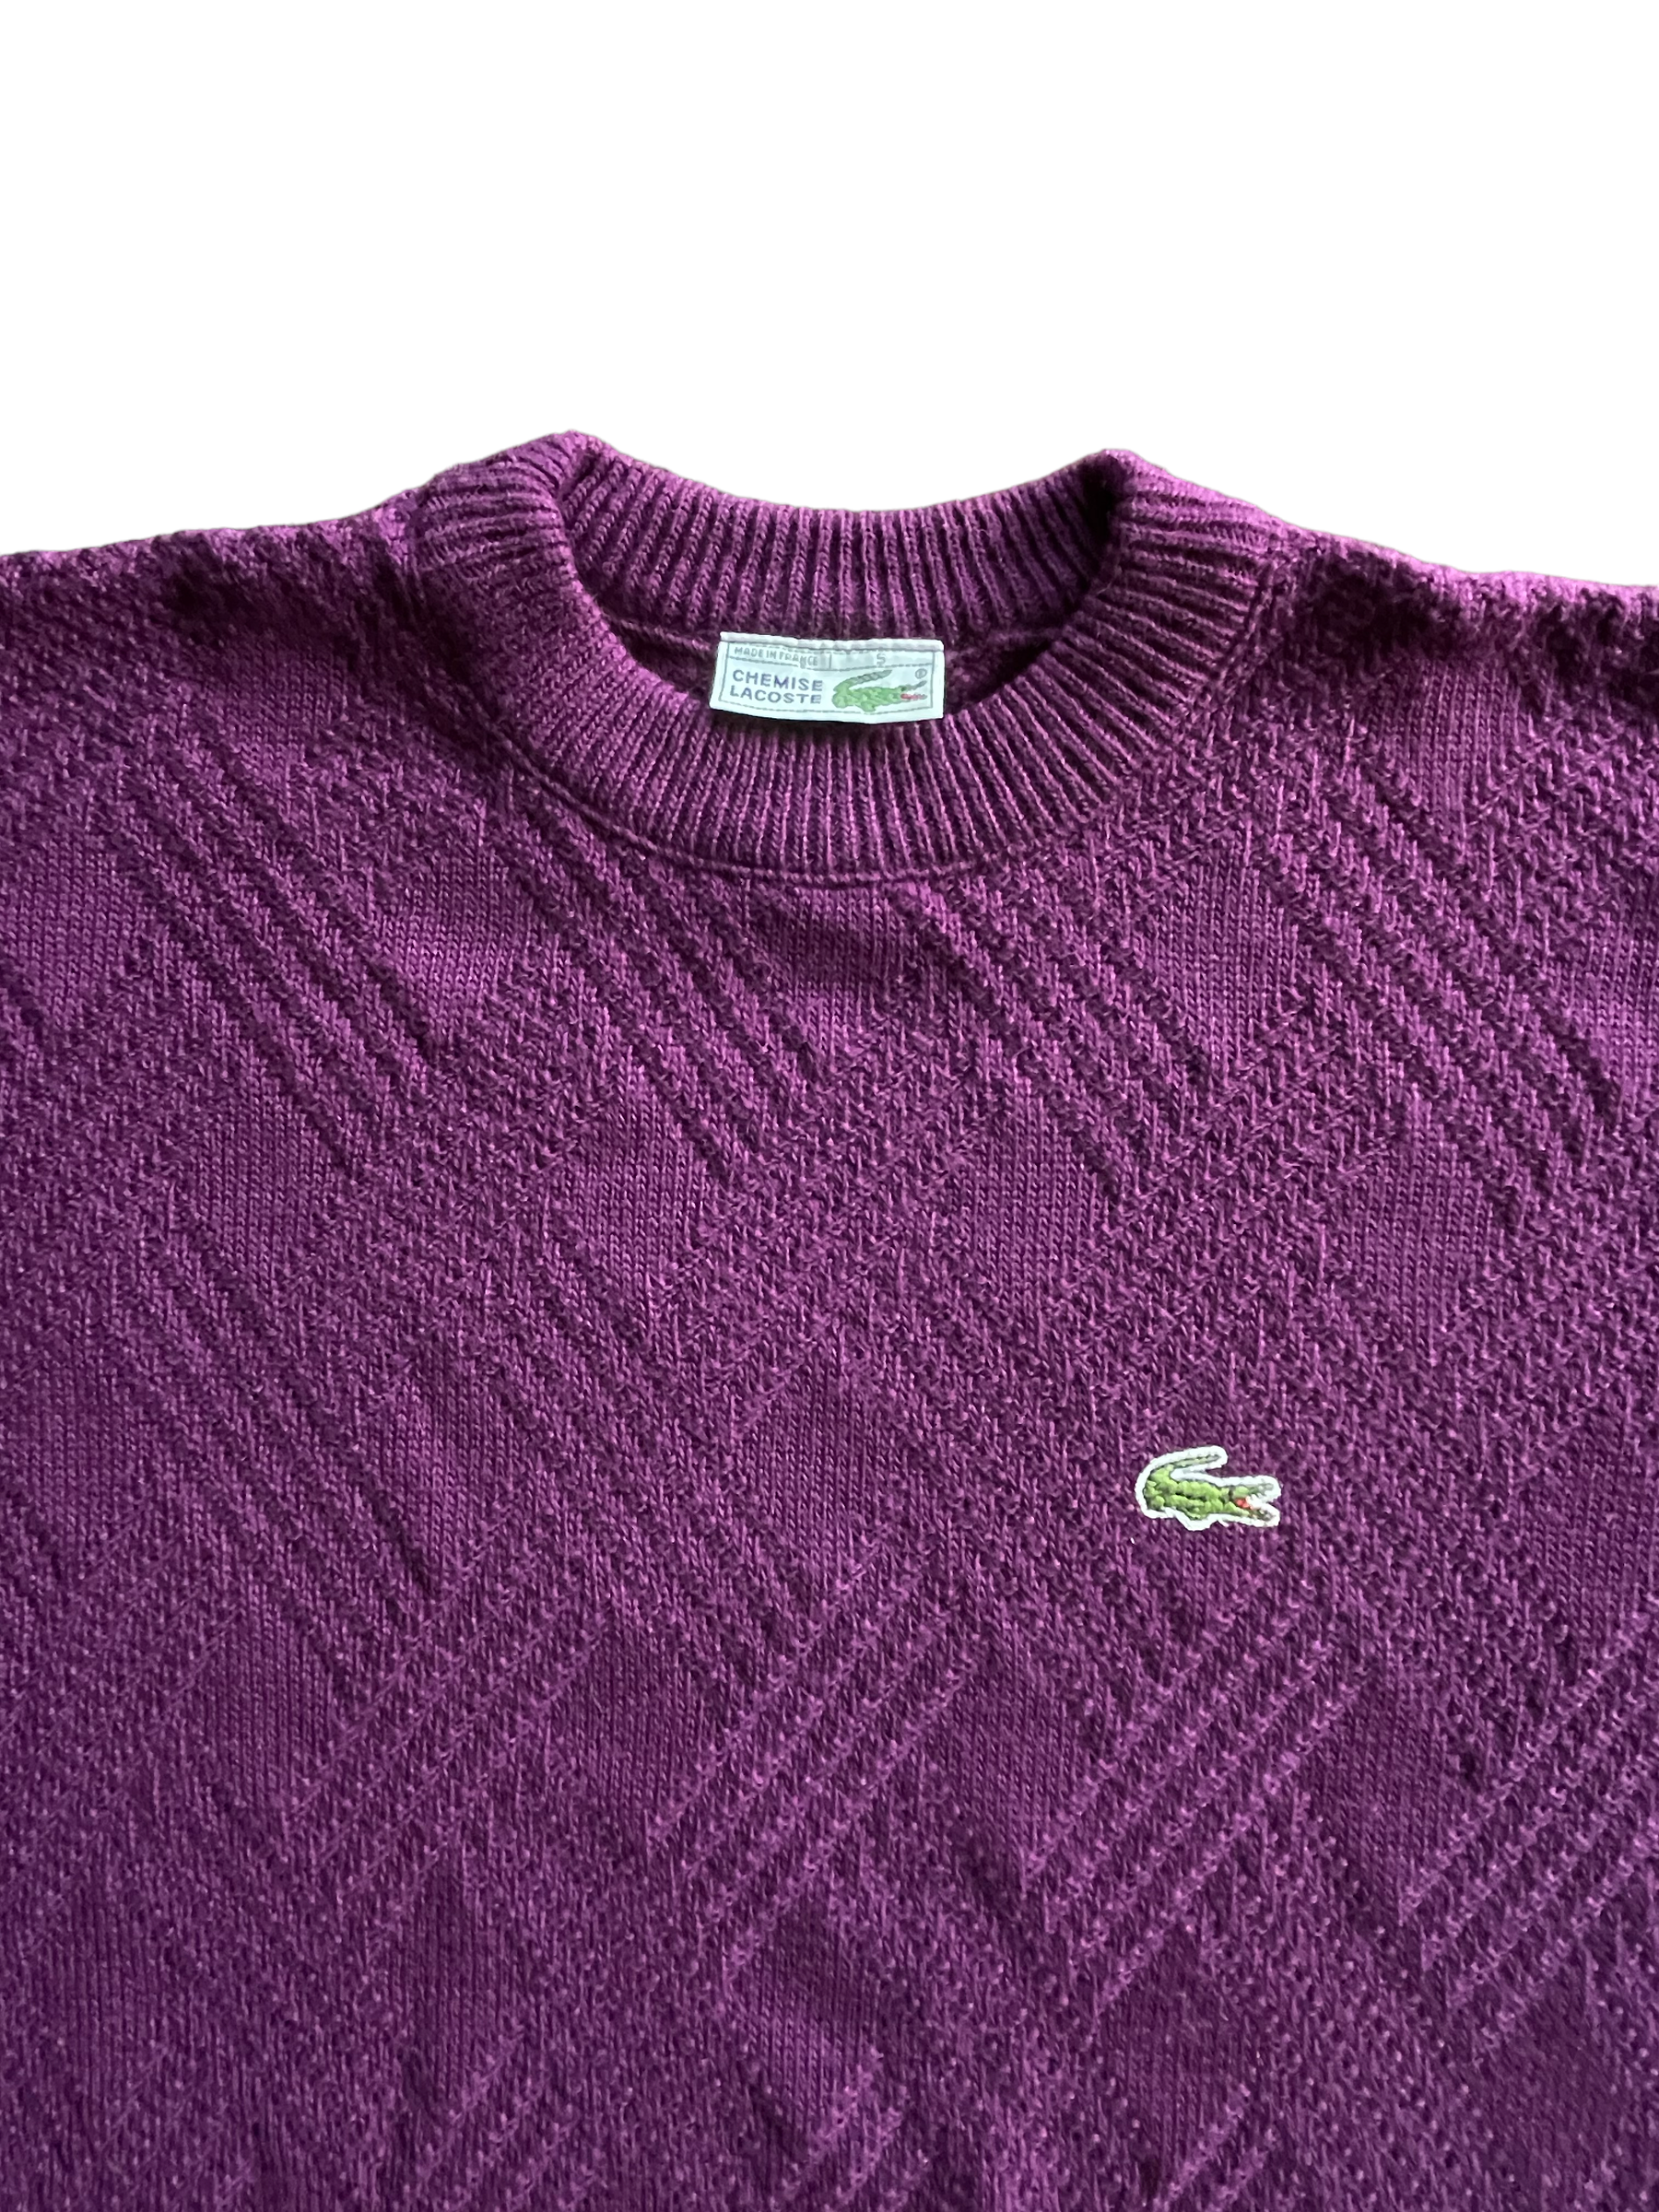 Vintage 80's Chemise Lacoste Jumper Made in France Purple Size M L